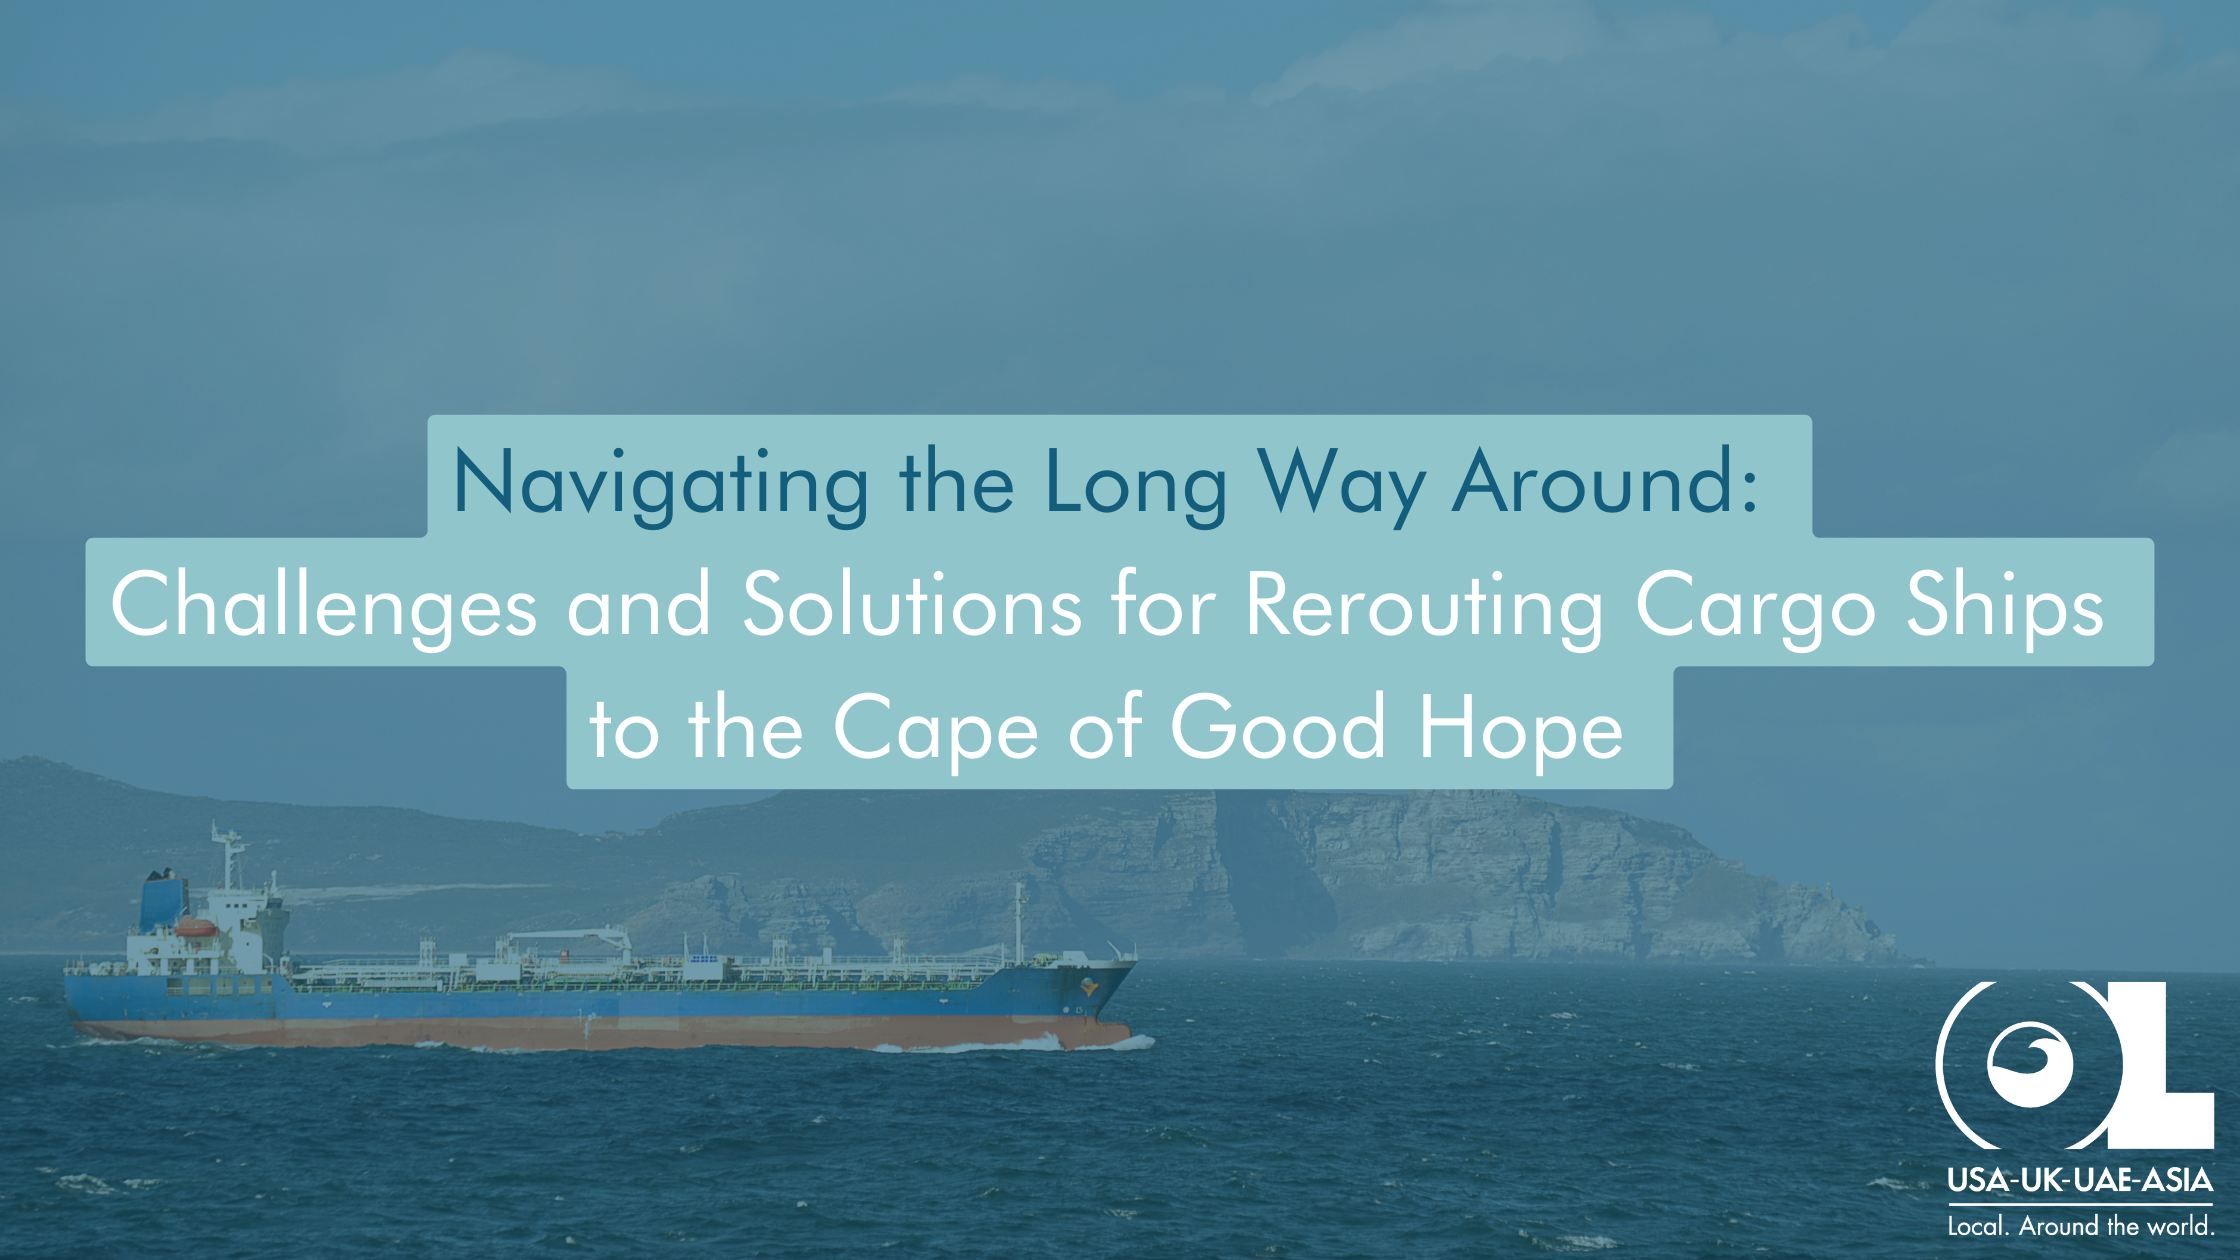 Navigating-the-Long-Way-Around-Challenges-and-Solutions-for-Rerouting-Cargo-Ships-to-the-Cape-of-Good-Hope-OL-USA